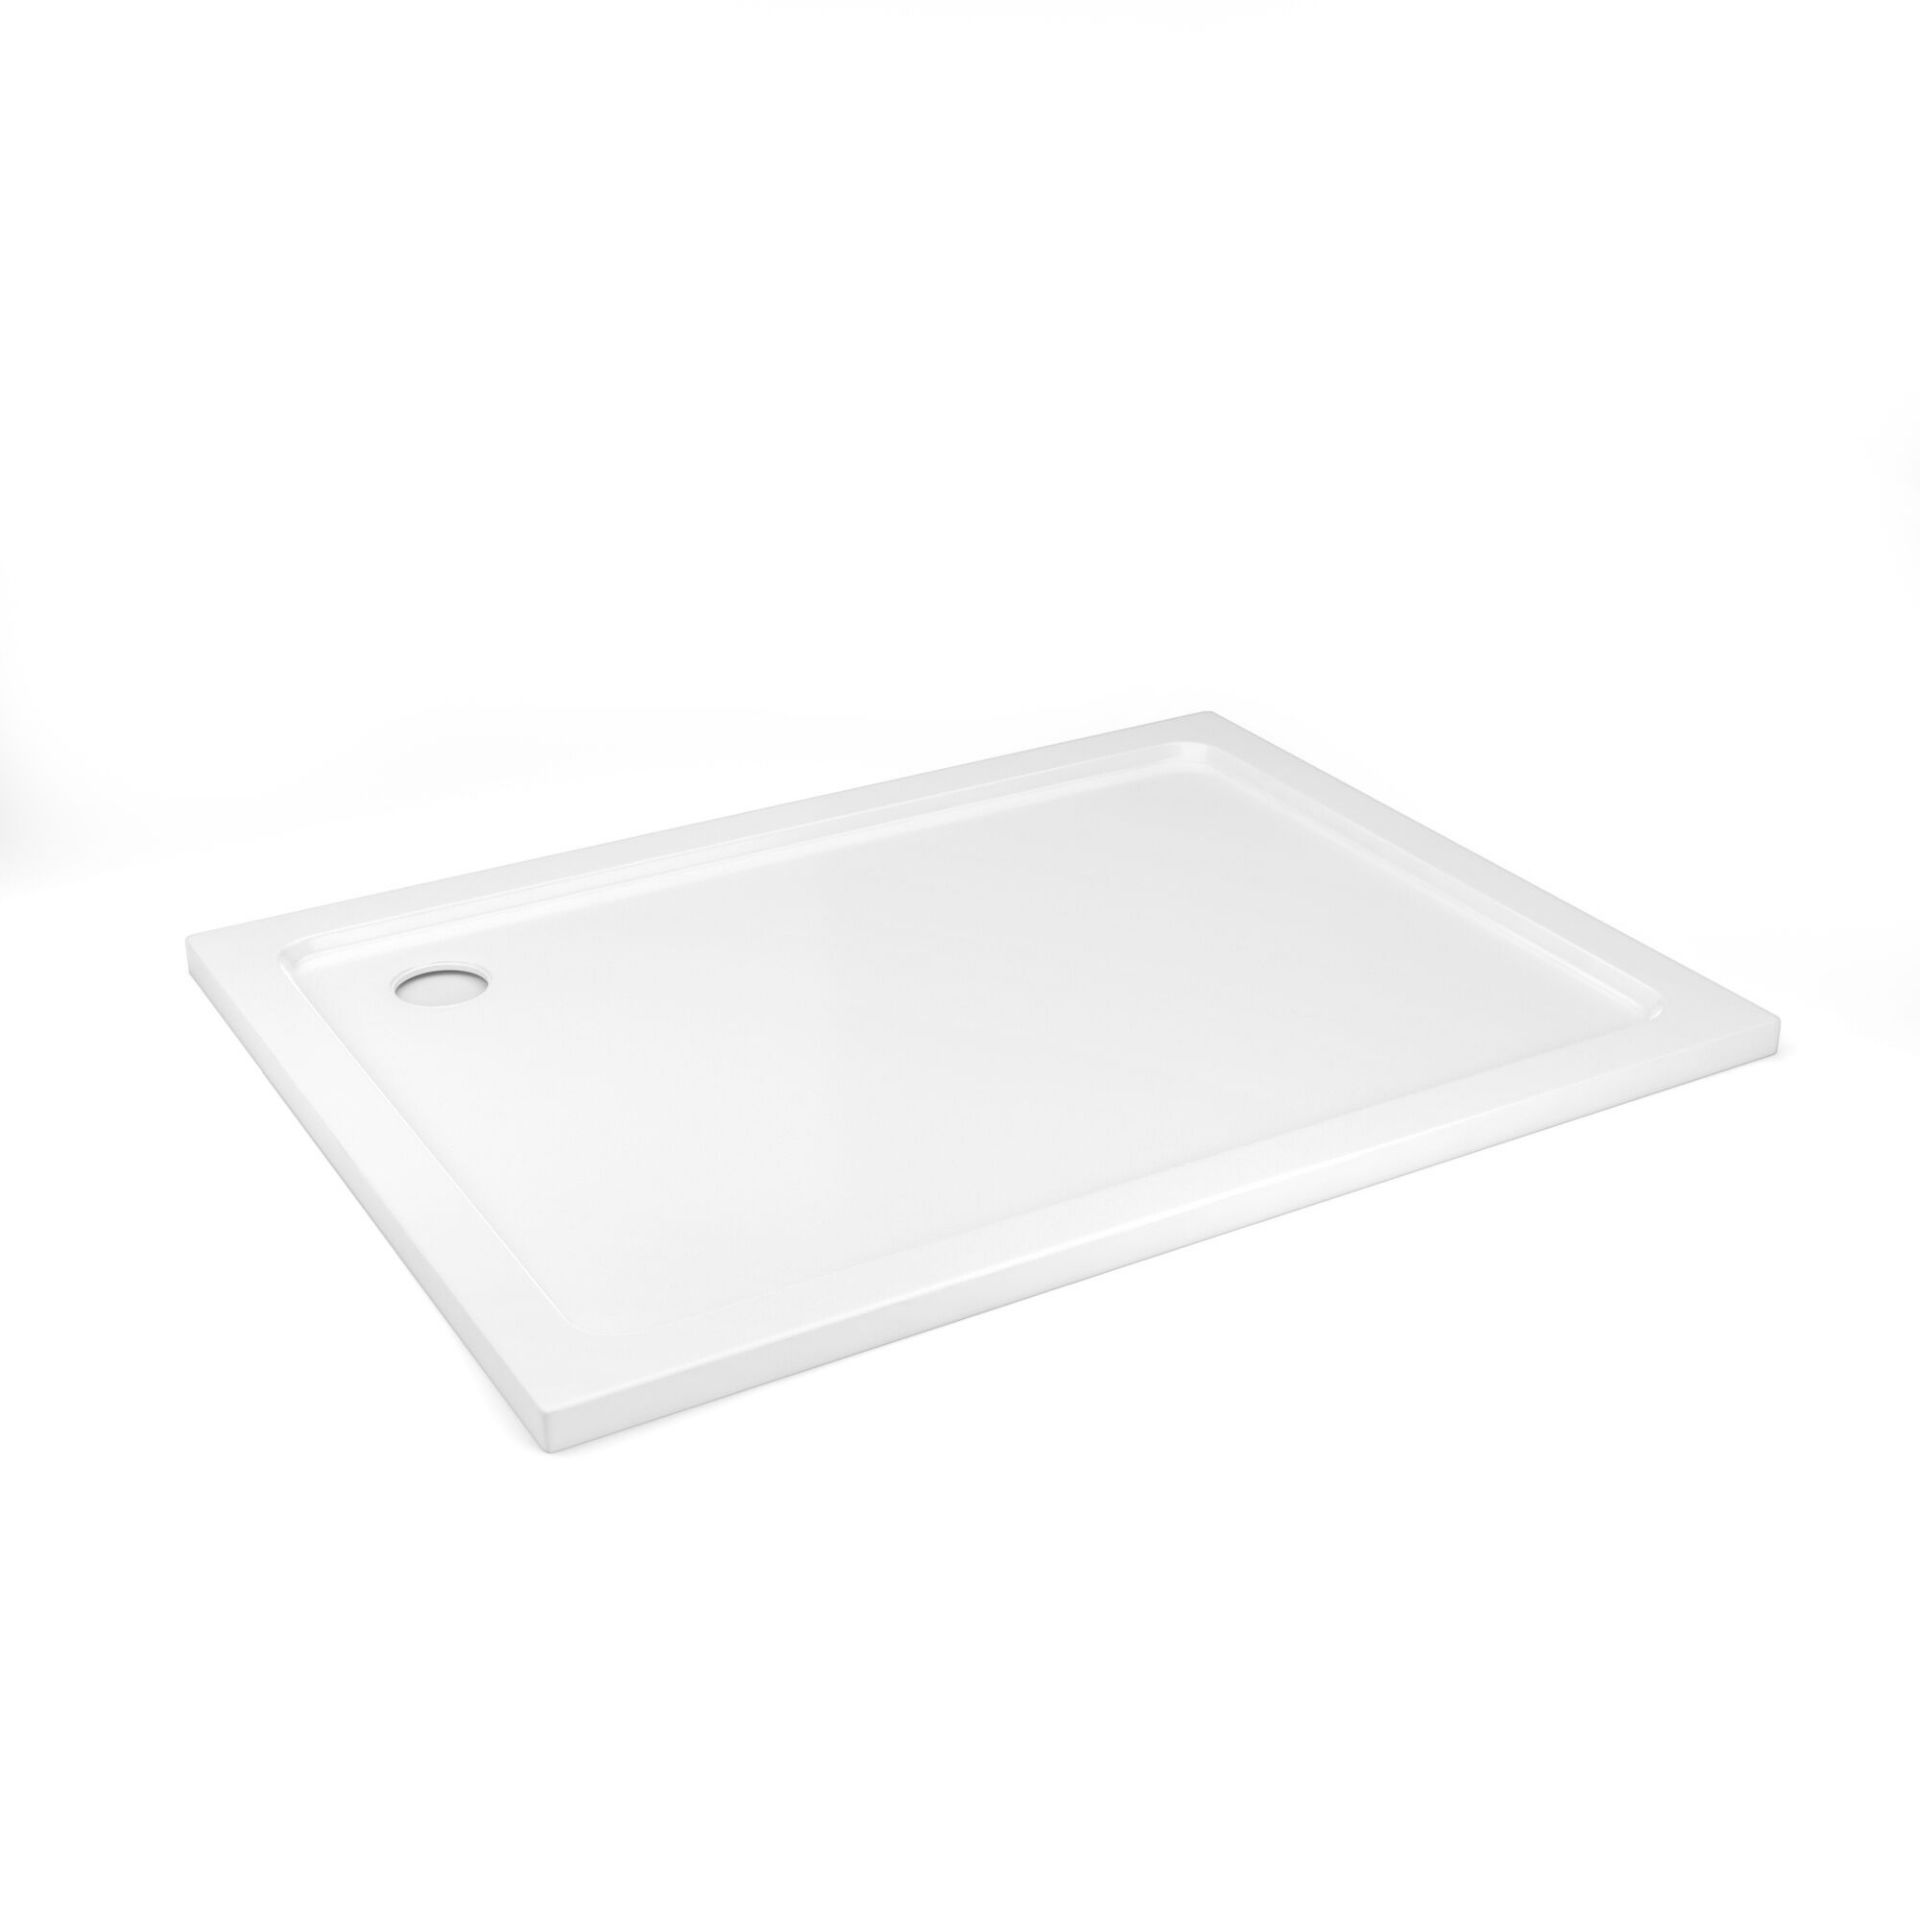 New (Wg47) 1200x900mm Rectangular Ultra Slim Stone Shower Tray. RRP £399.99. Low Profile Ultra... - Image 2 of 2